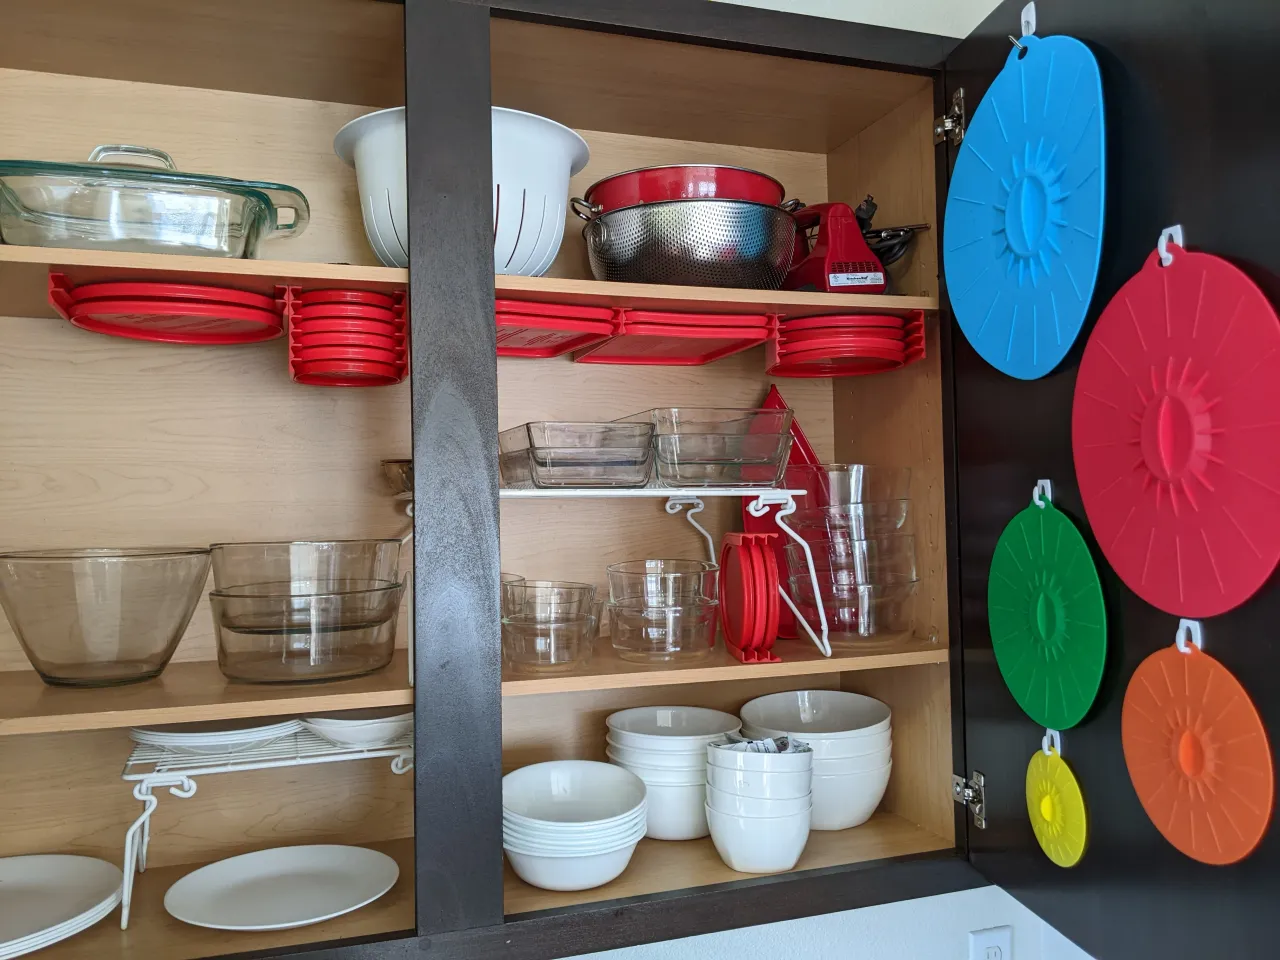 Modular Lid Storage System for Pyrex Storage Containers by